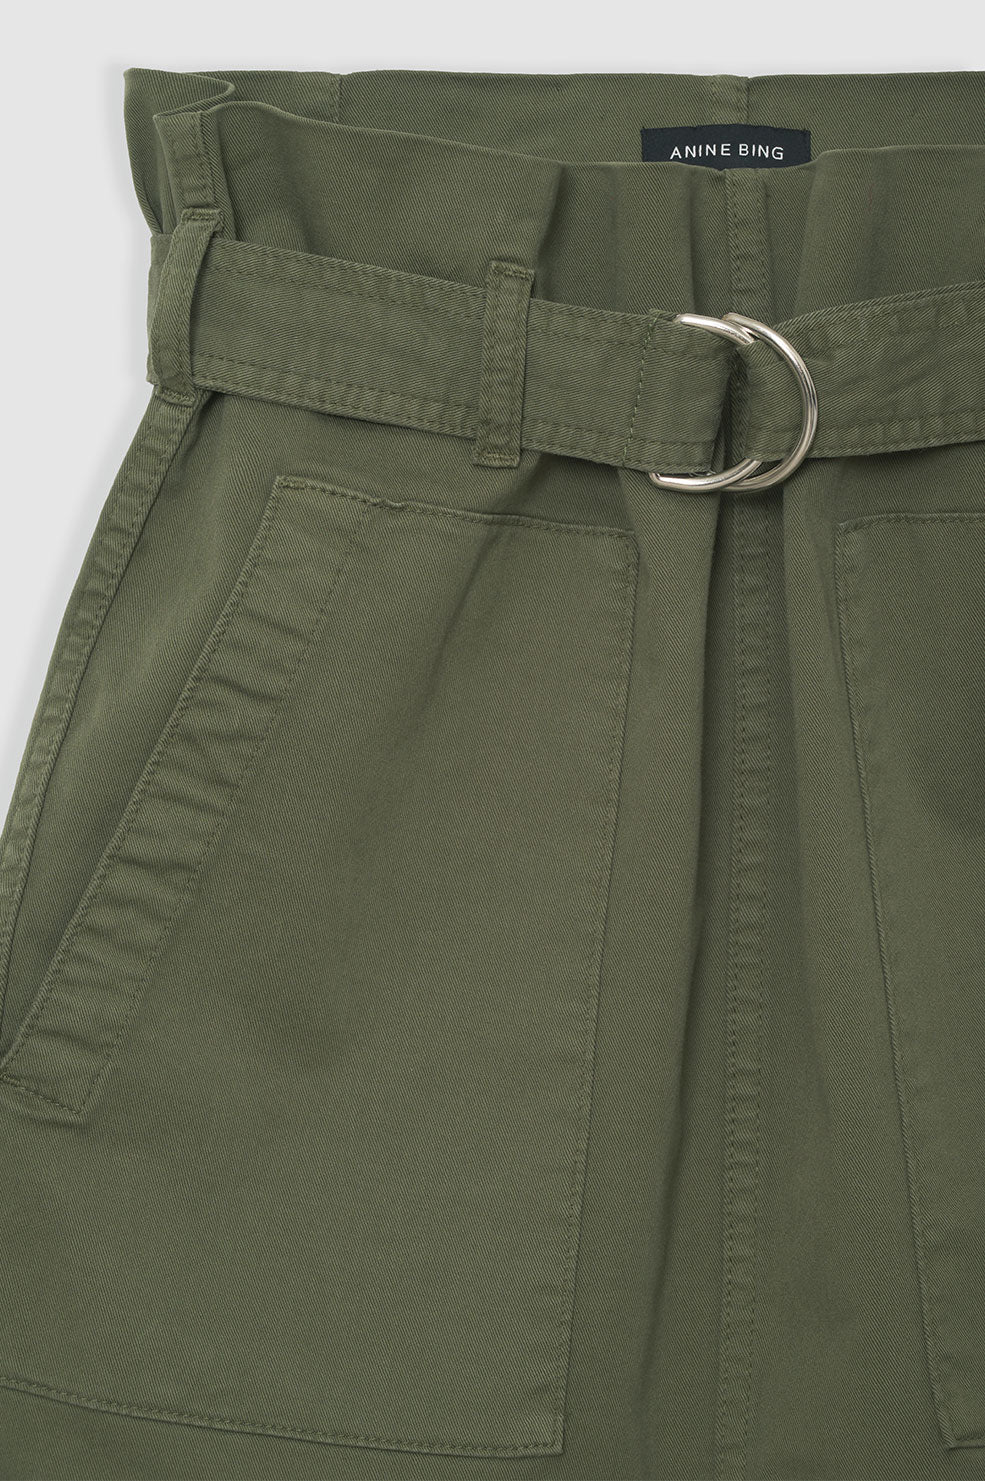 ANINE BING Aveline Skirt - Army Green - Front Detail View